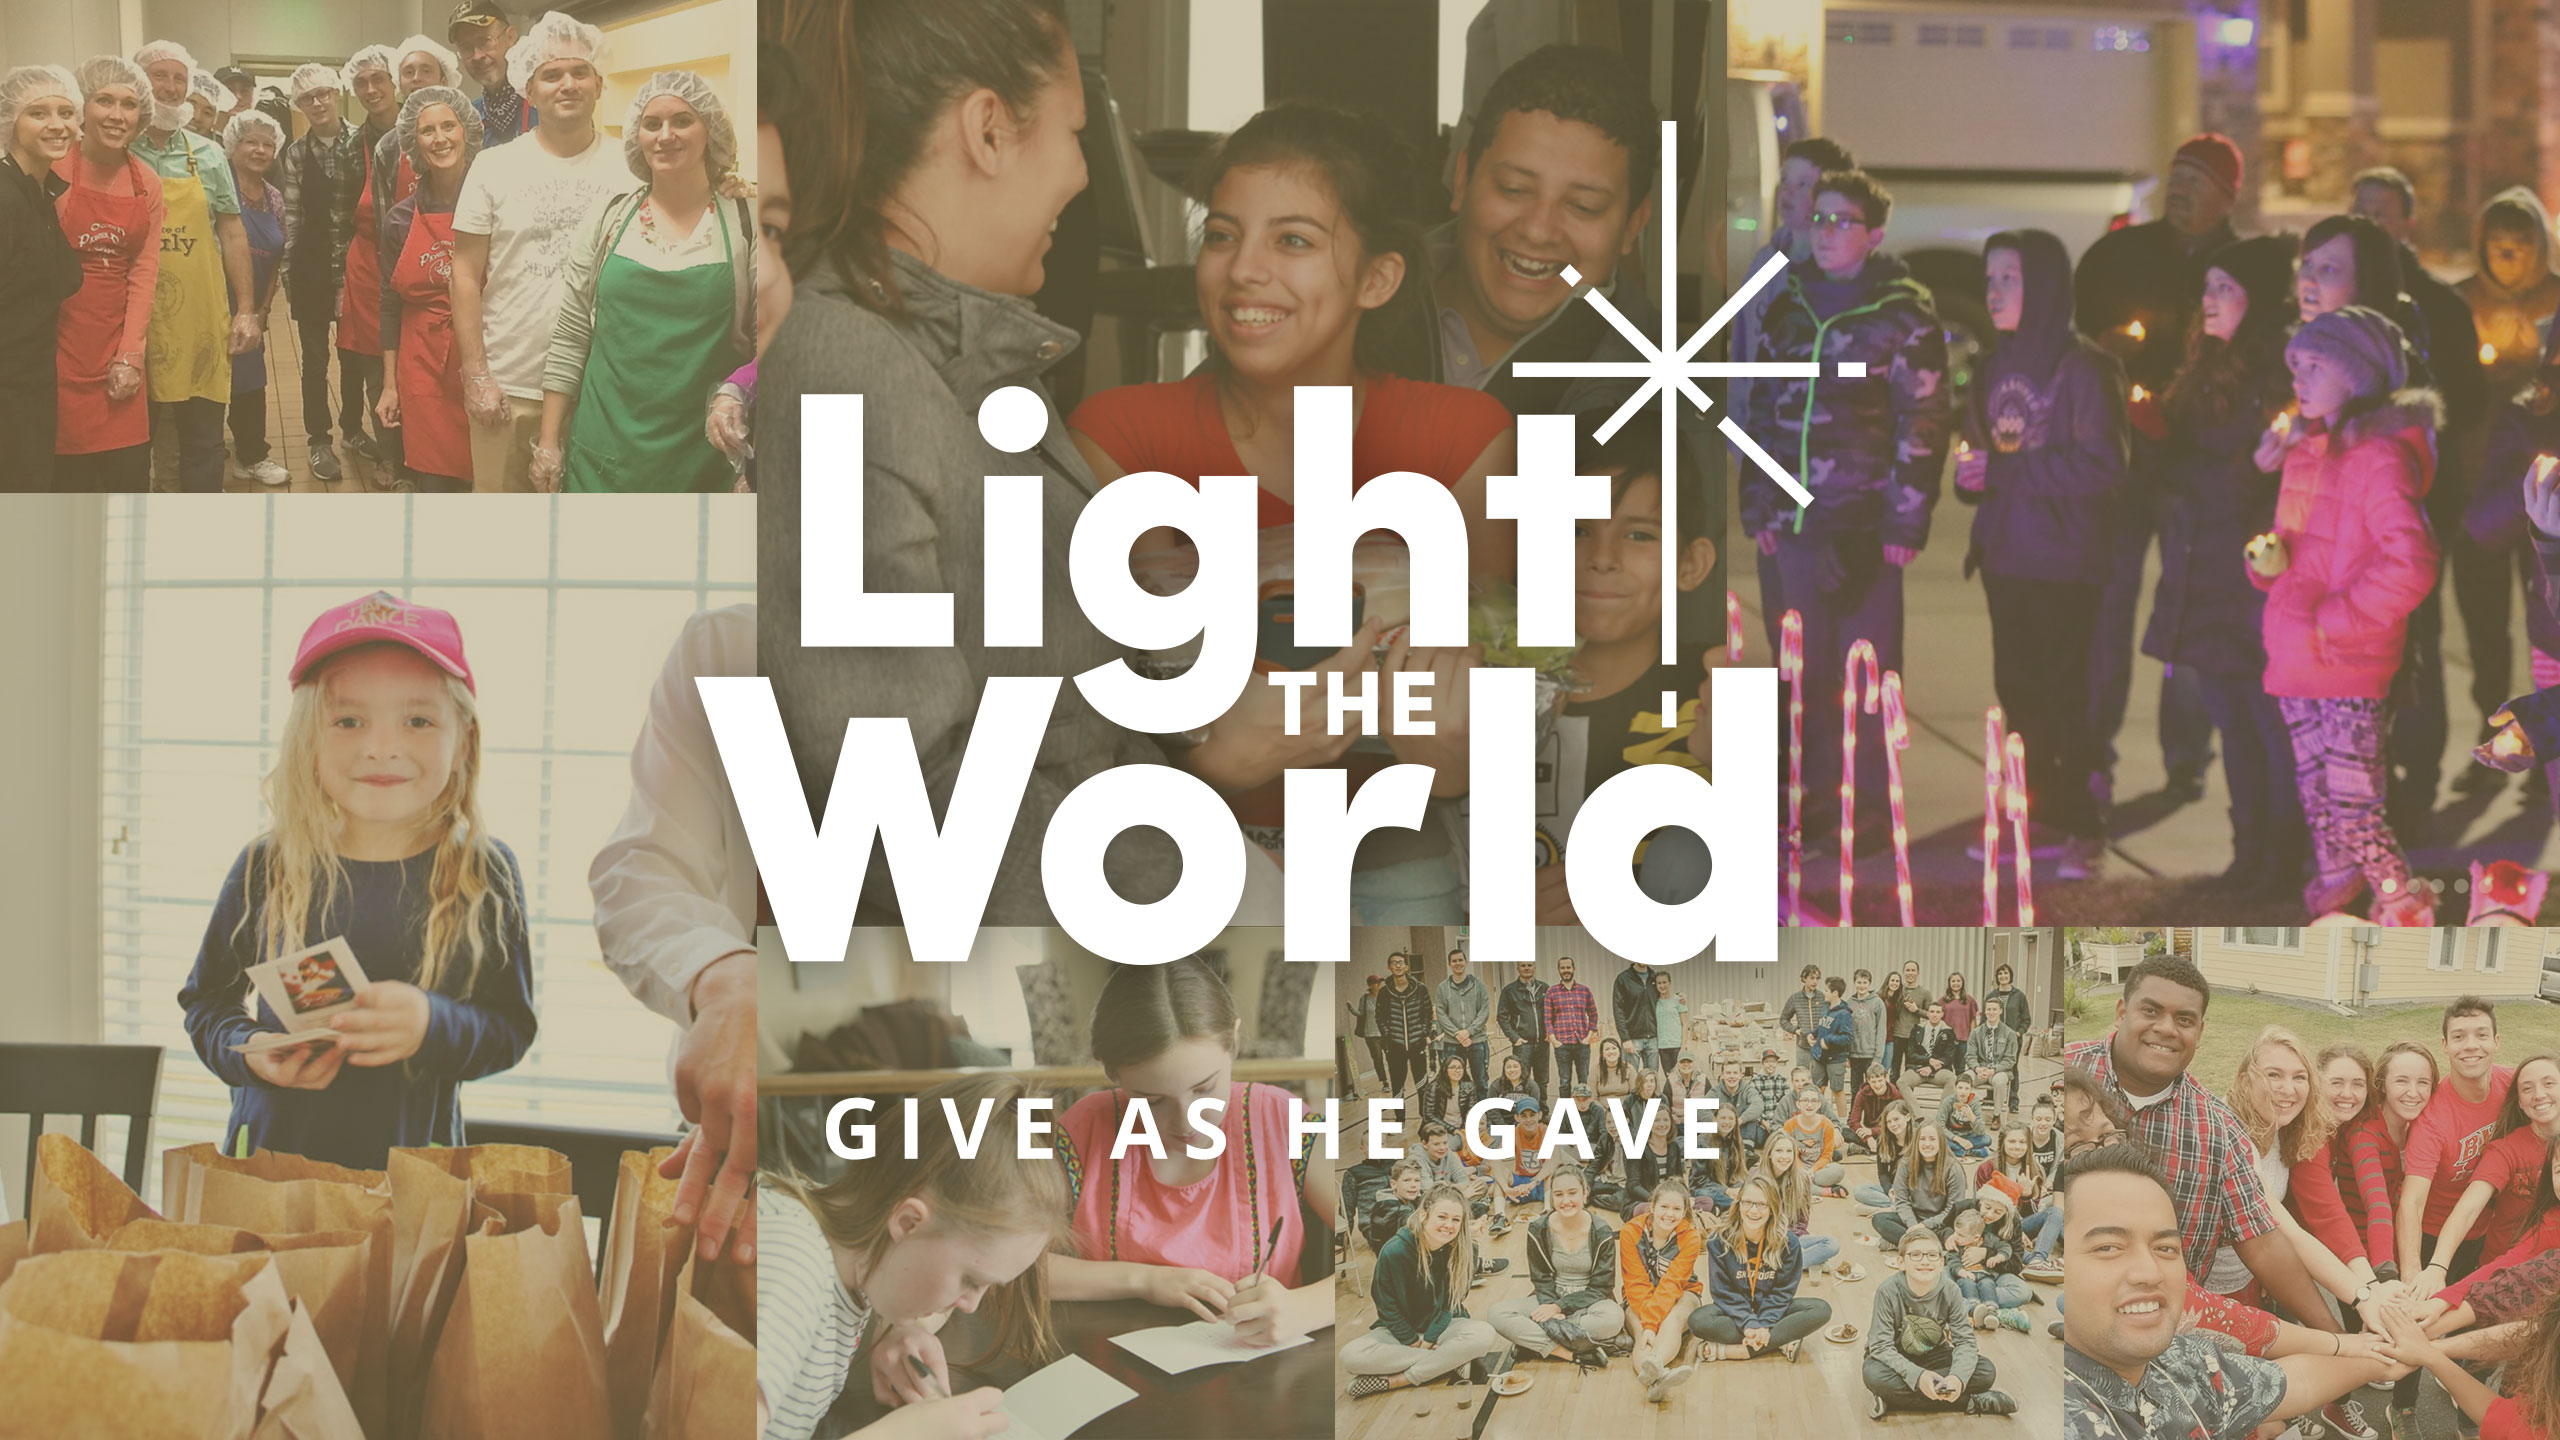 Donate to WaterAid and LDS Light the World campaign 2018